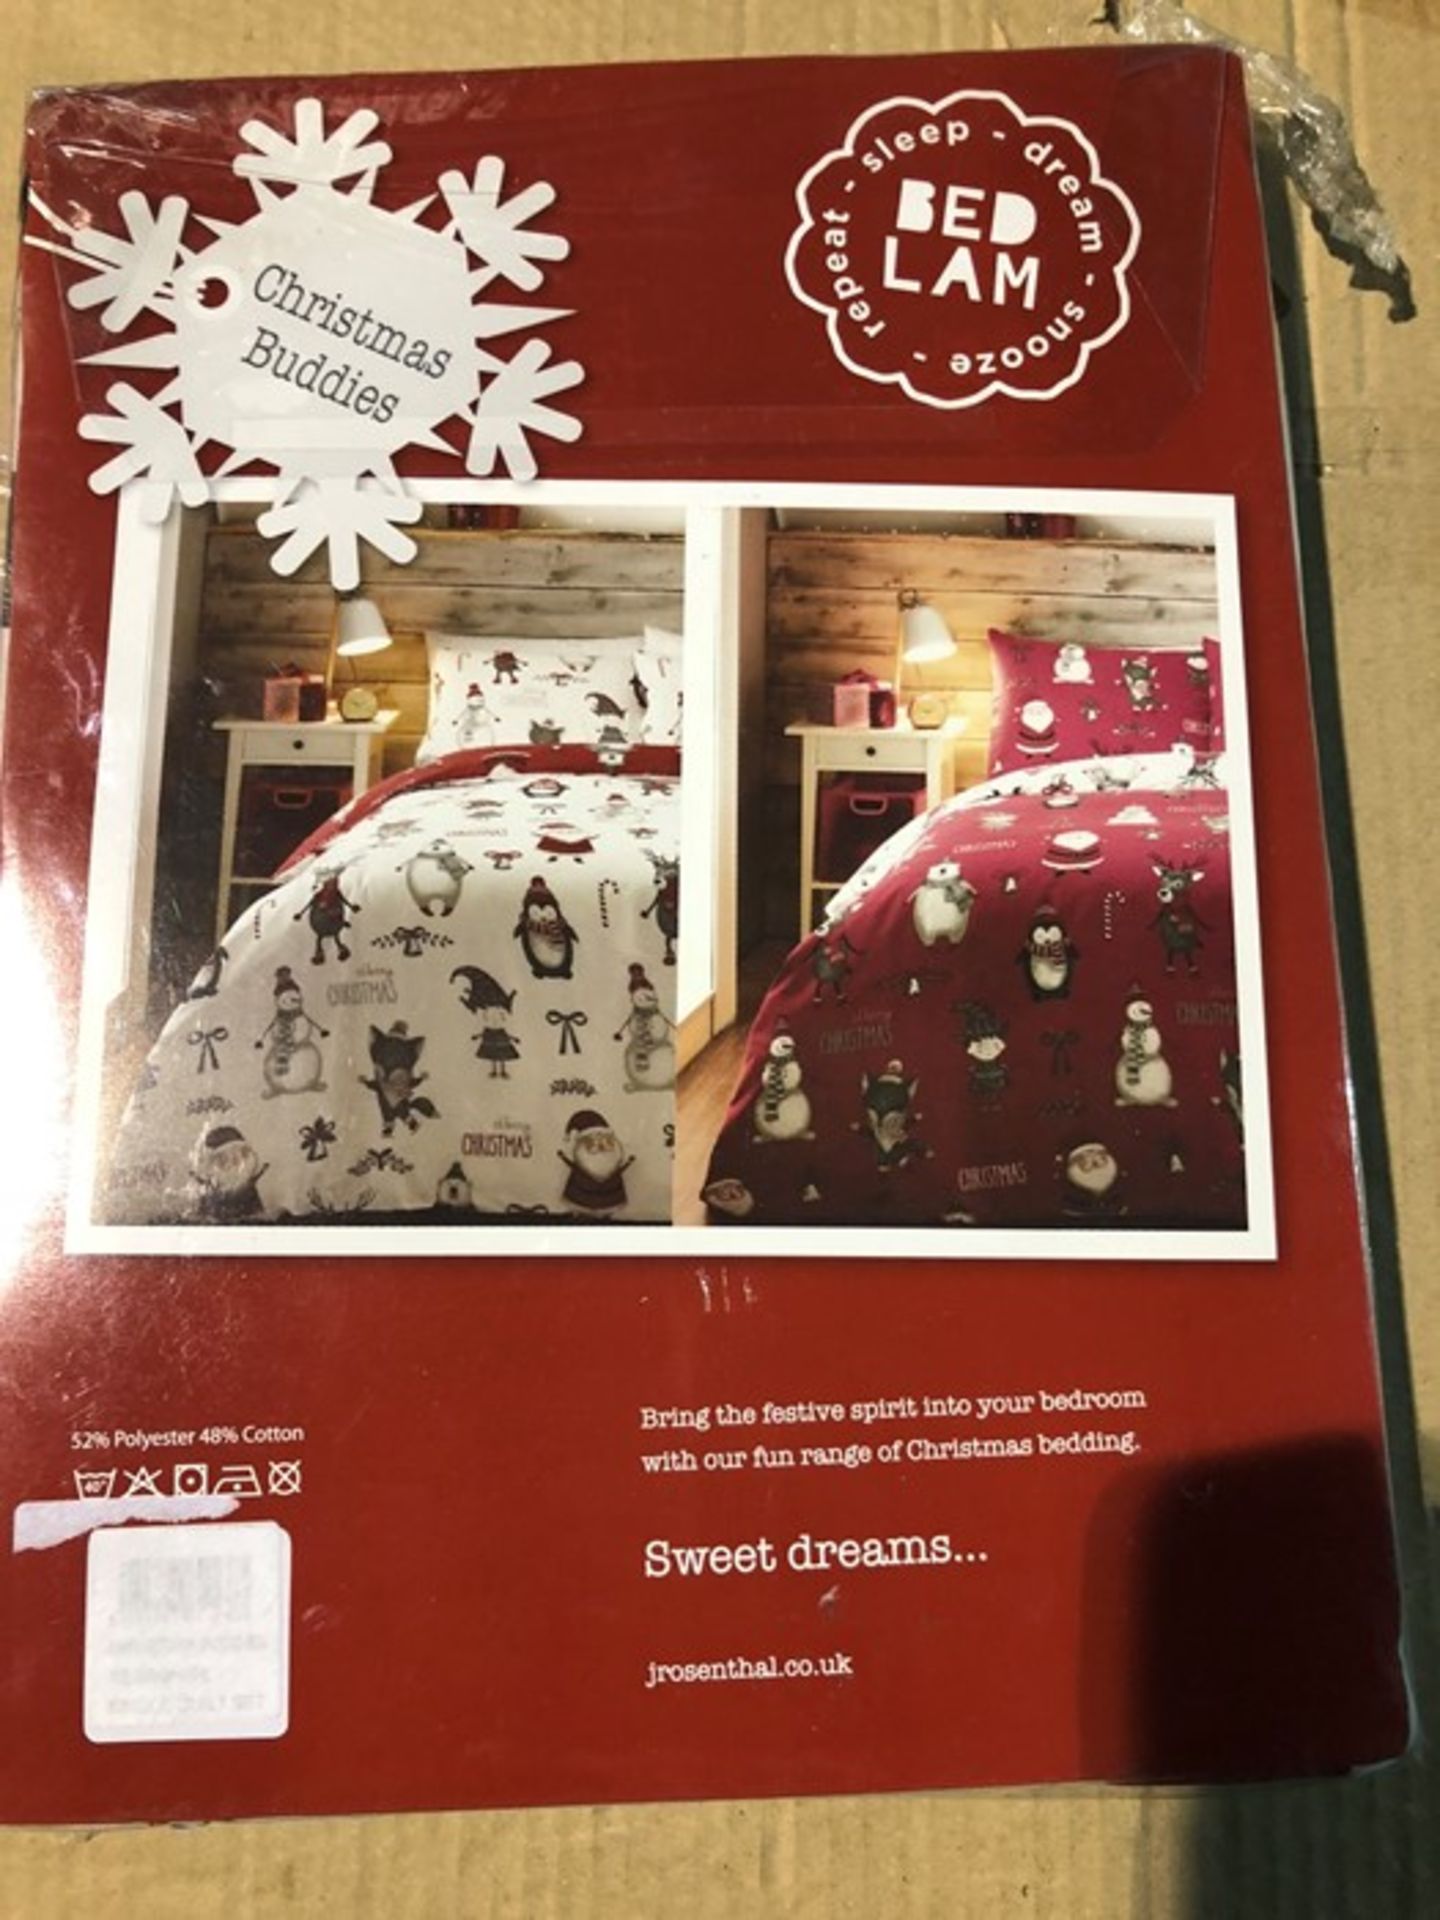 1 AS NEW BAGGED CHRISTMAS BUDDIES SINGLE DUVET SET (VIEWING HIGHLY RECOMMENDED)